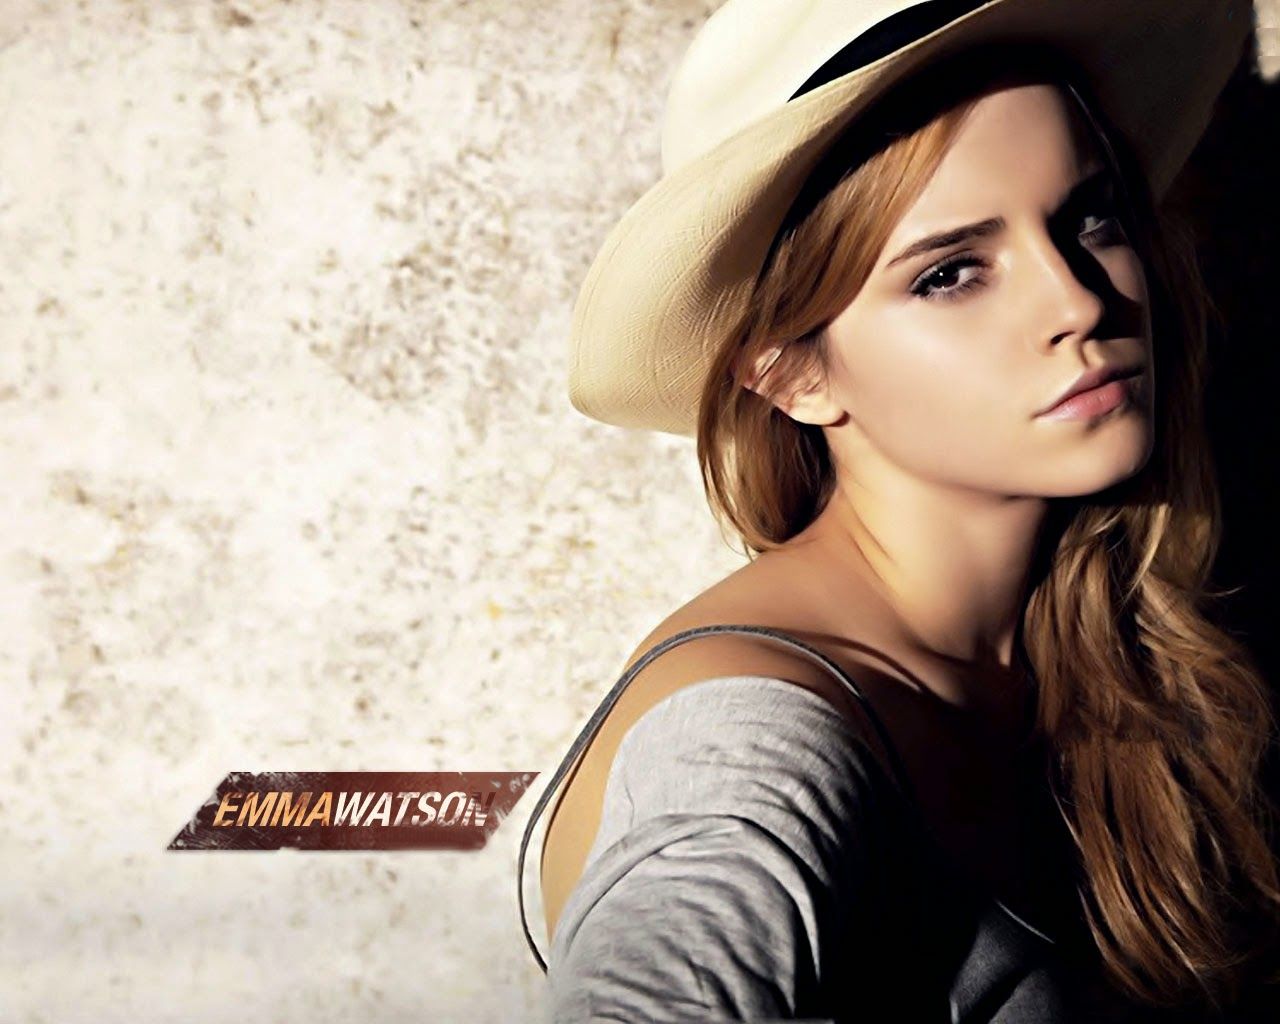 Wellcome To Bollywood HD Wallpapers: Emma Watson Hollywood Actress Full HD Wallpapers